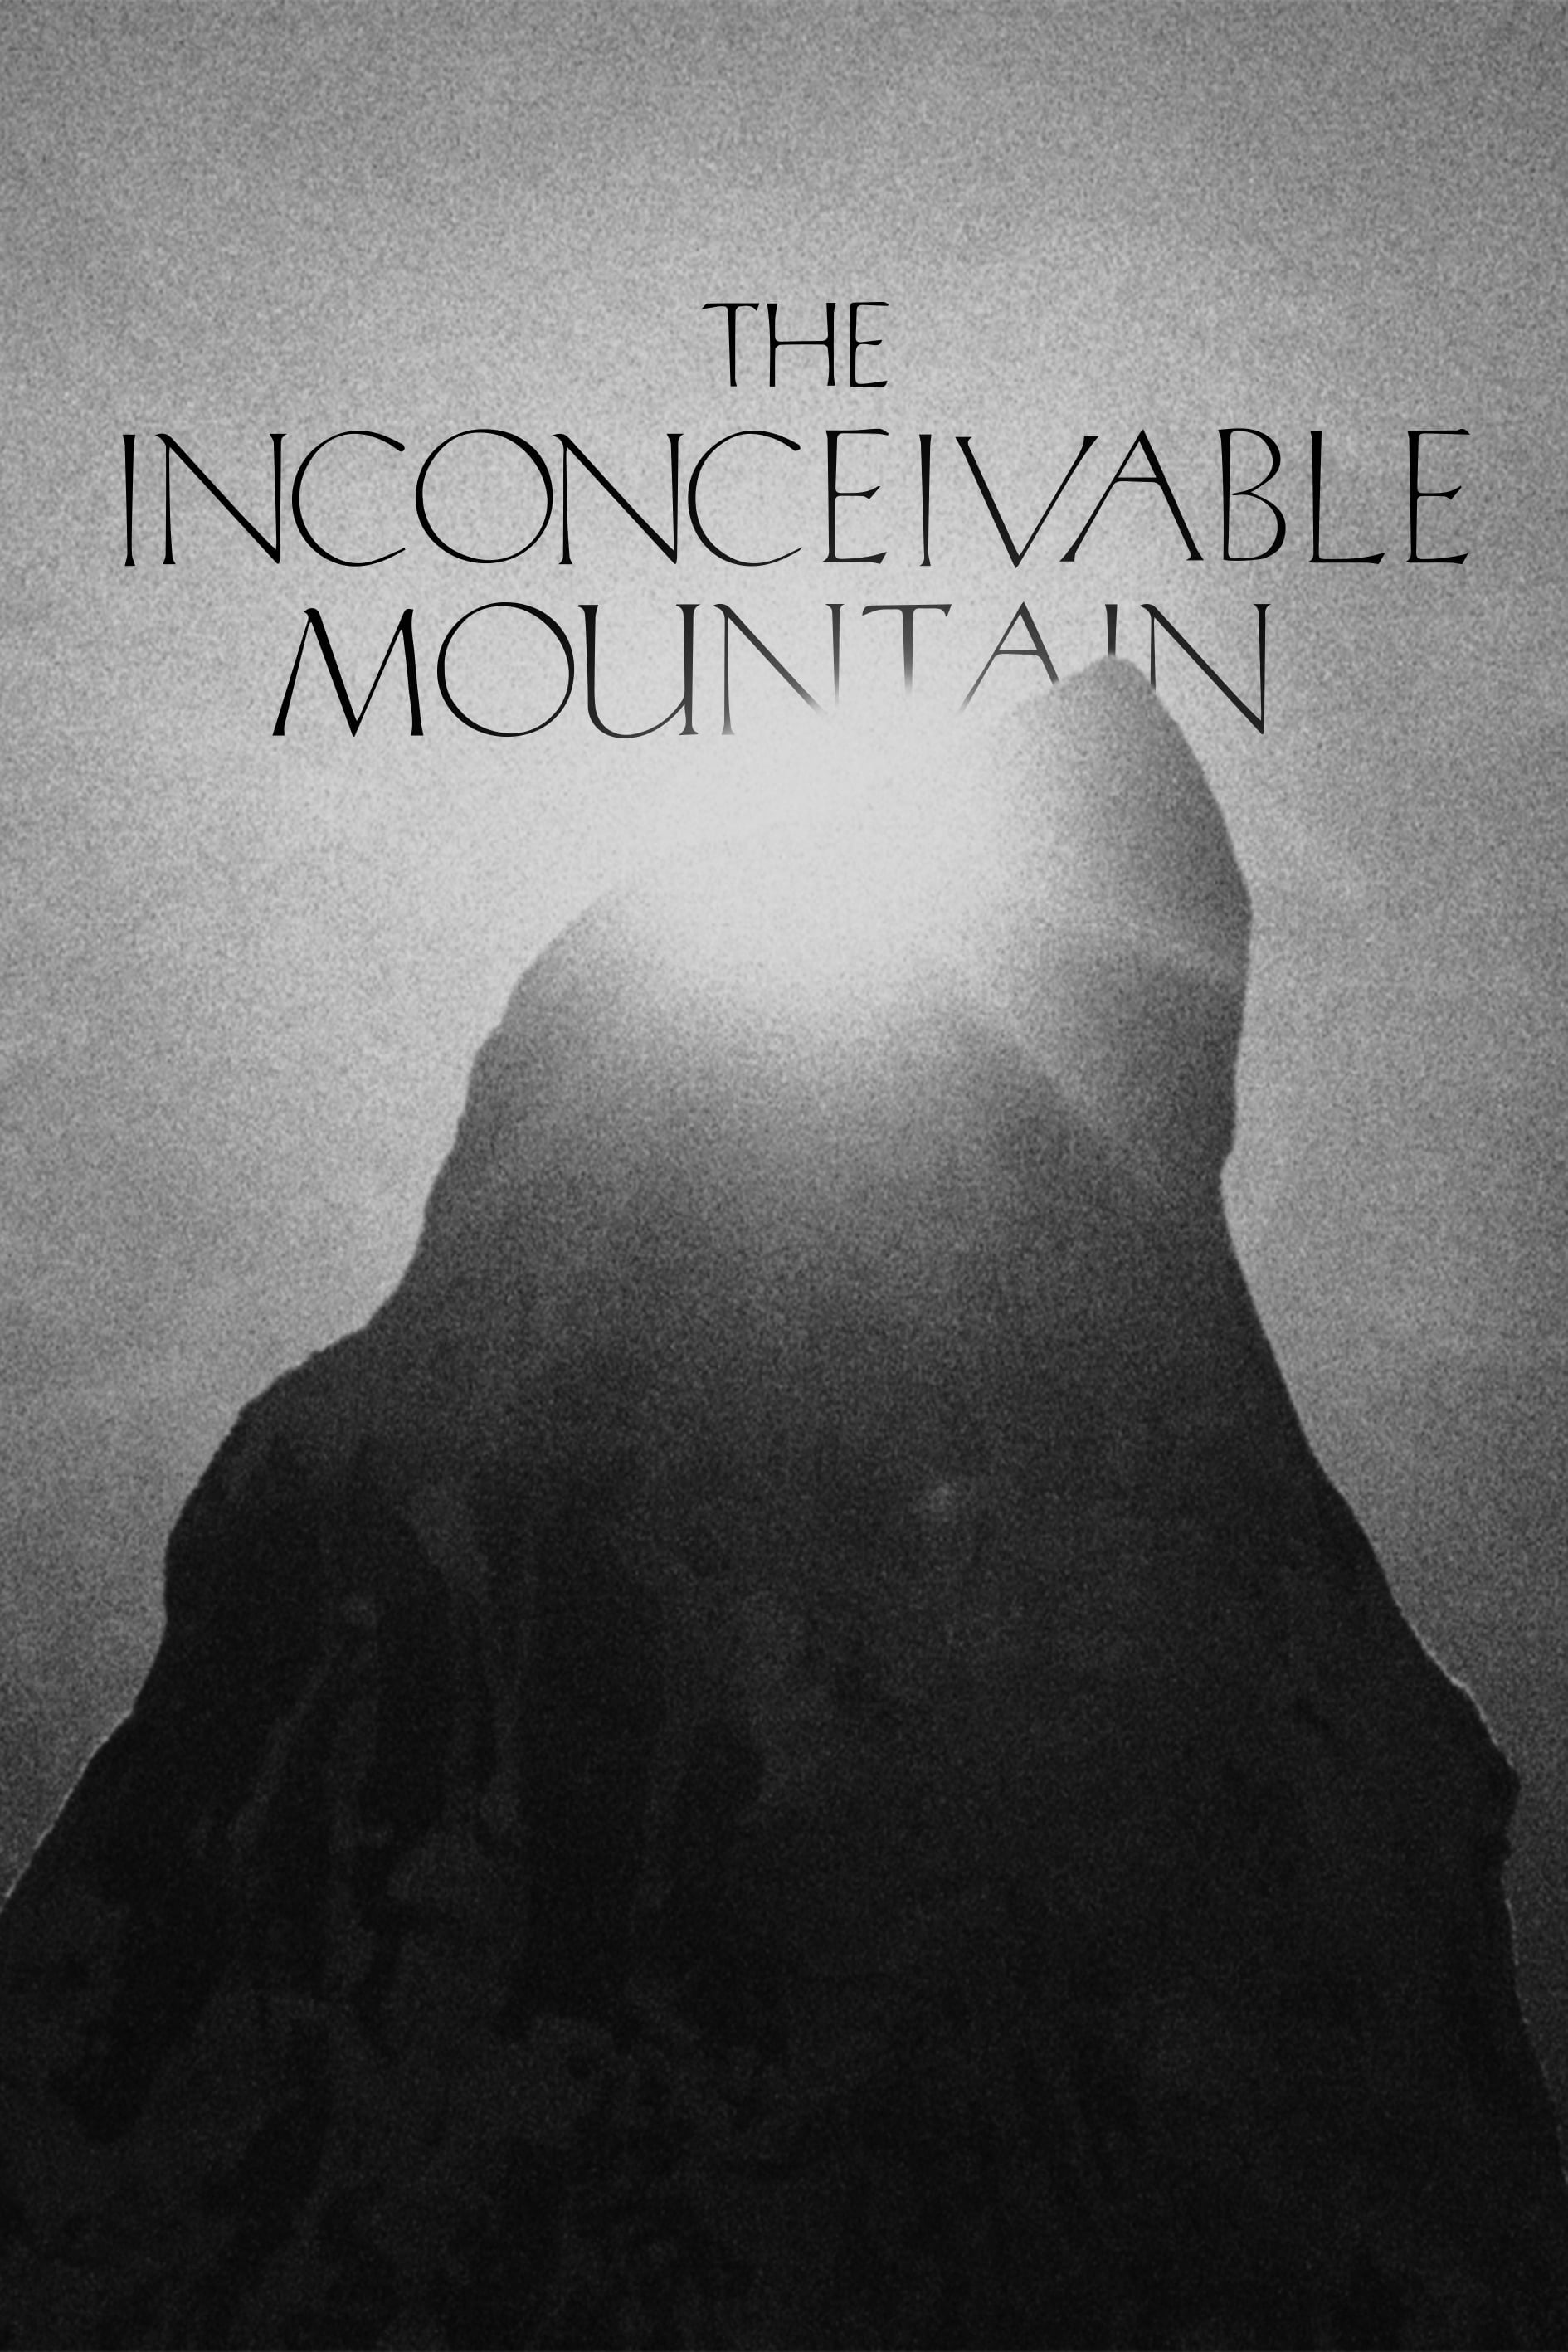 The Inconceivable Mountain